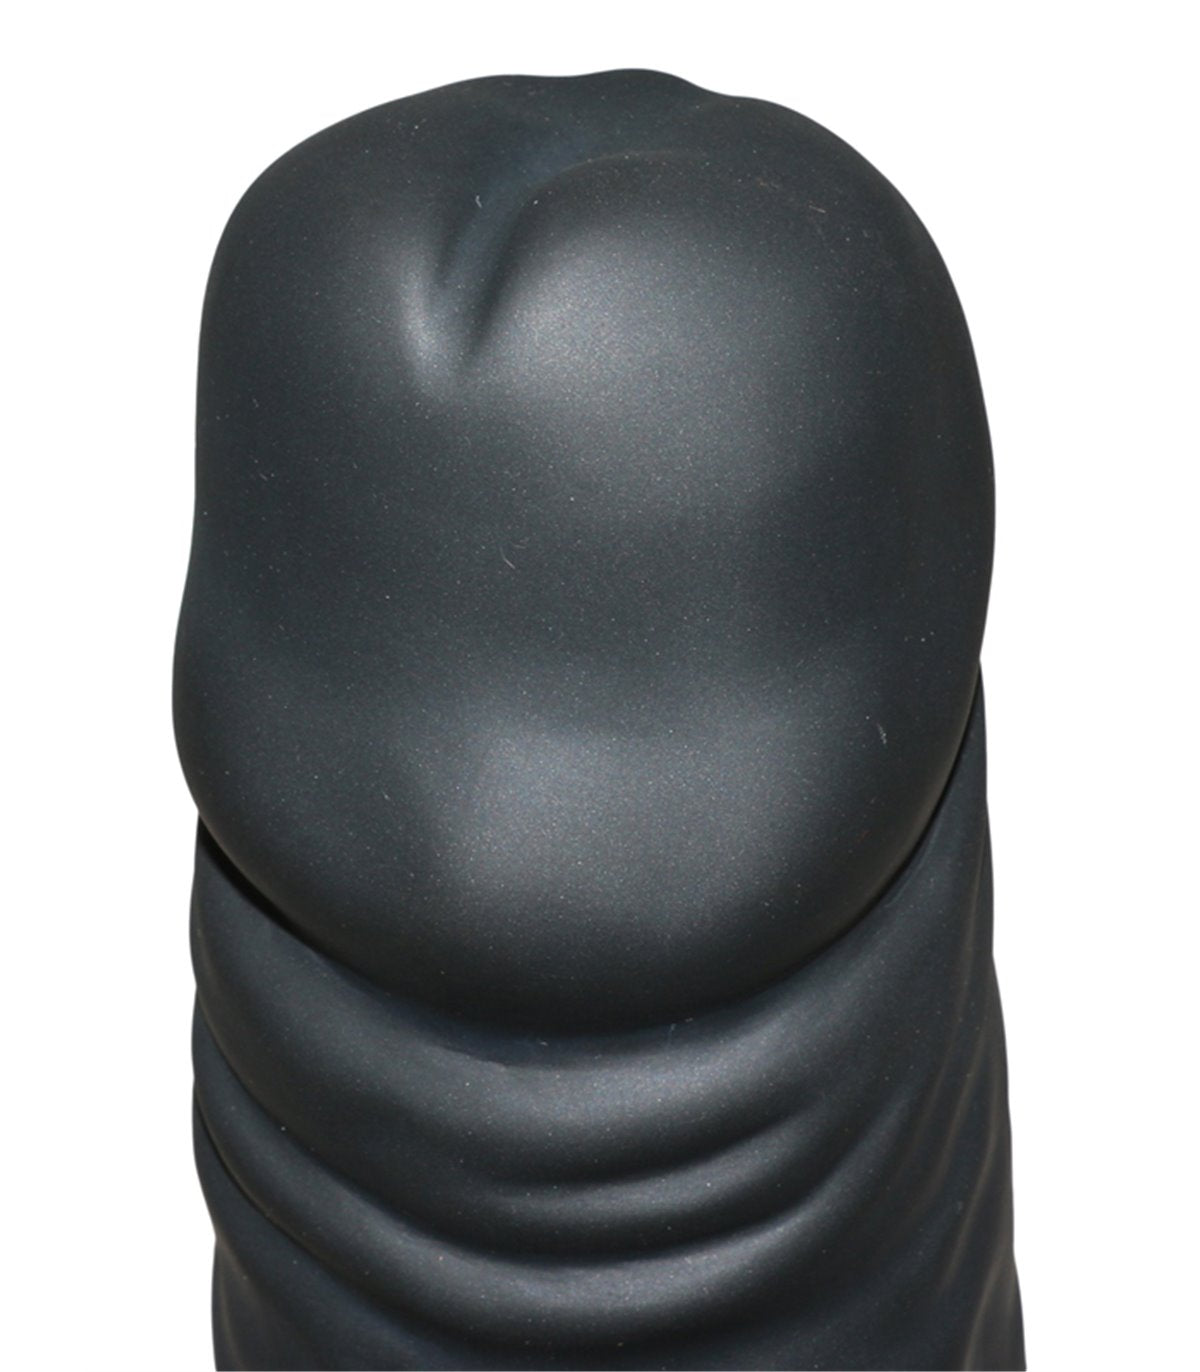 Leviathan Giant Inflatable Dildo with Internal Core - APLTD